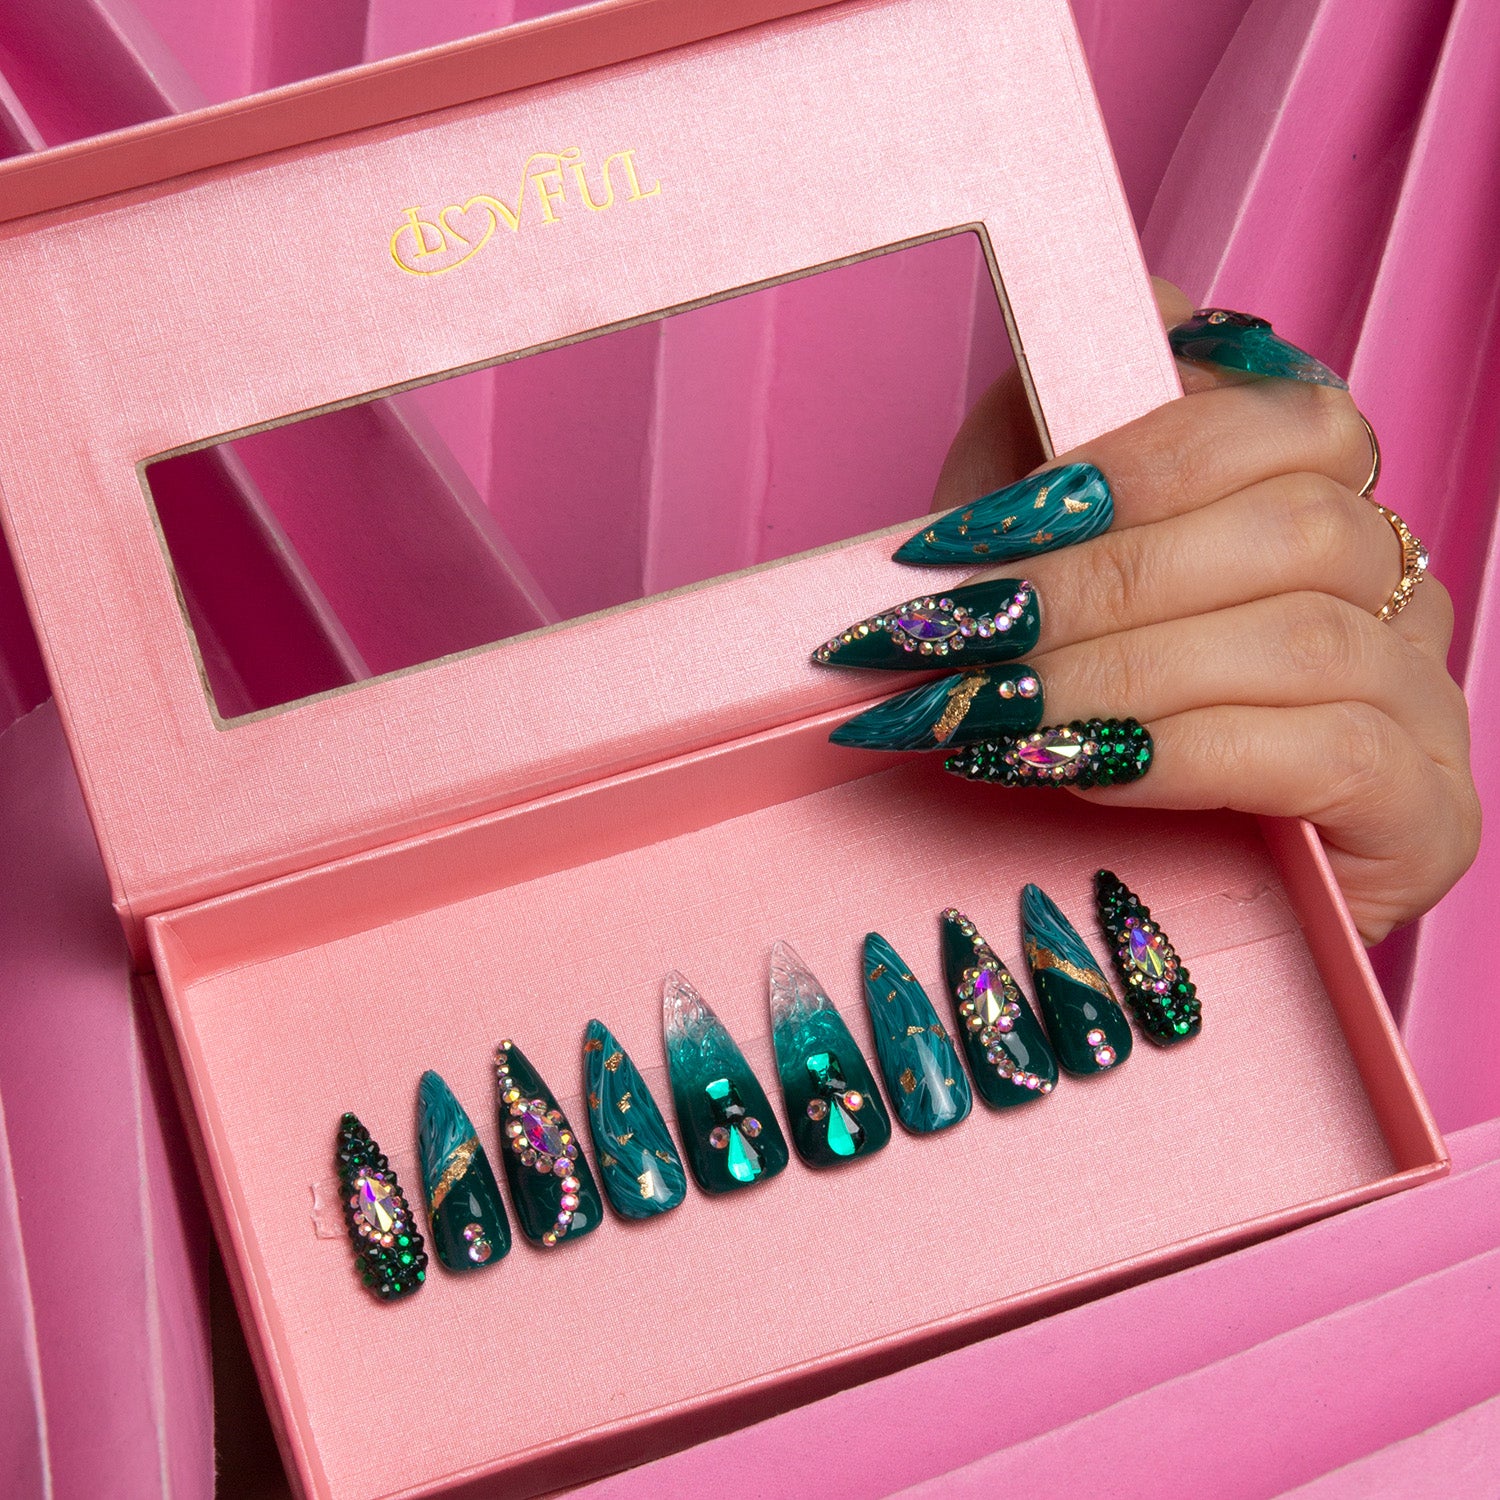 Hand wearing long, stiletto-shaped Emerald Envy press-on nails with intricate green and gold designs, displayed in a pink Lovful branded box against a pink textured background.